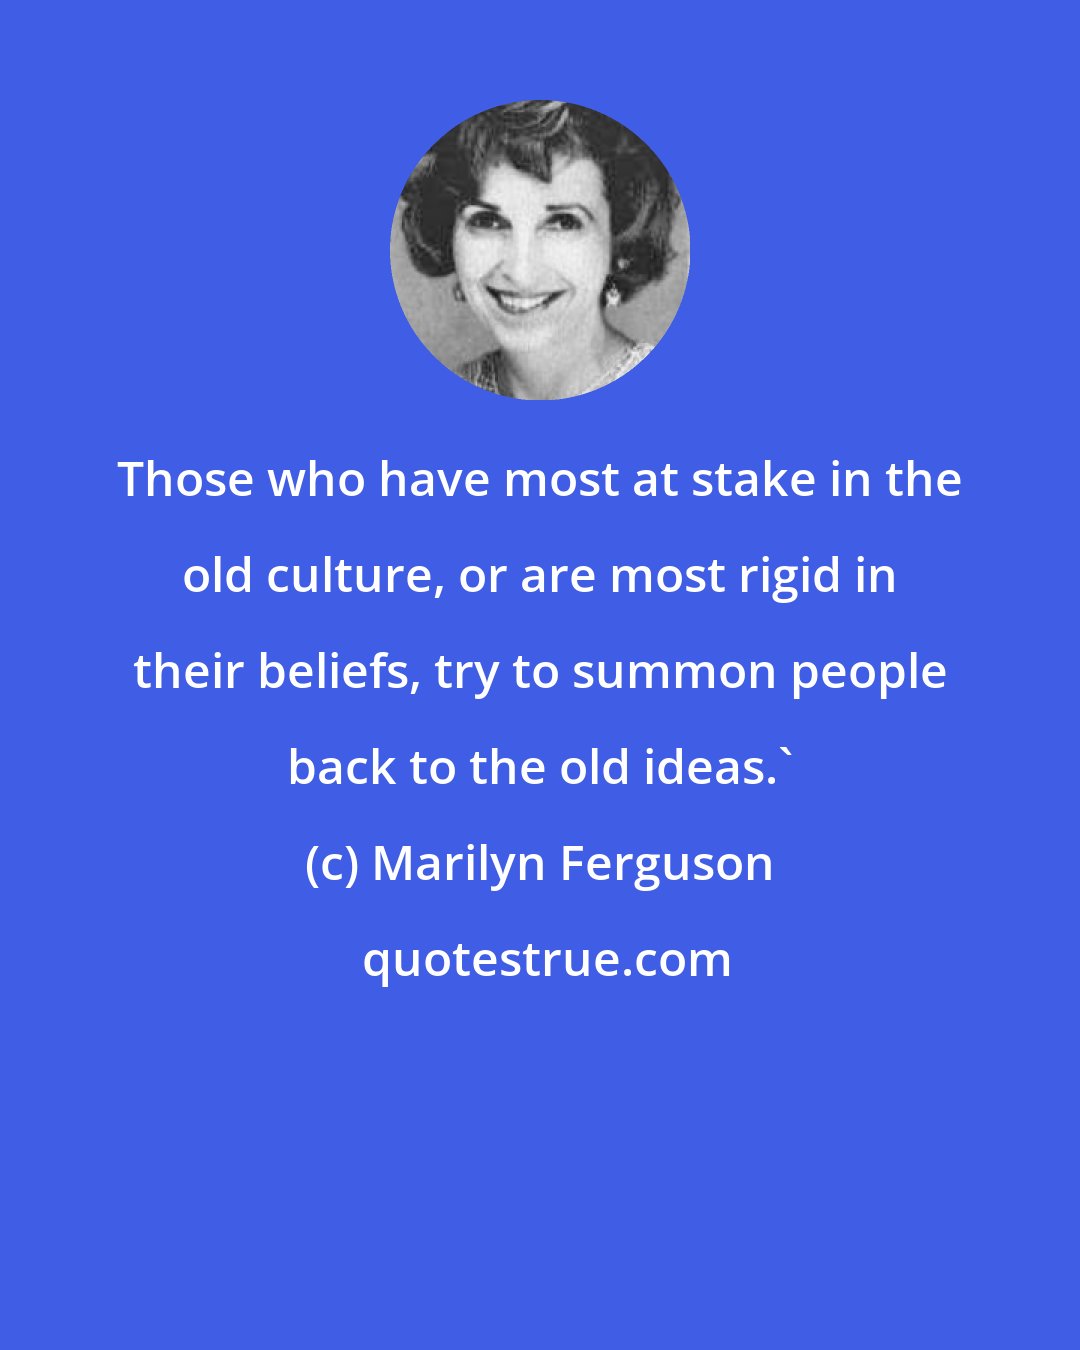 Marilyn Ferguson: Those who have most at stake in the old culture, or are most rigid in their beliefs, try to summon people back to the old ideas.'